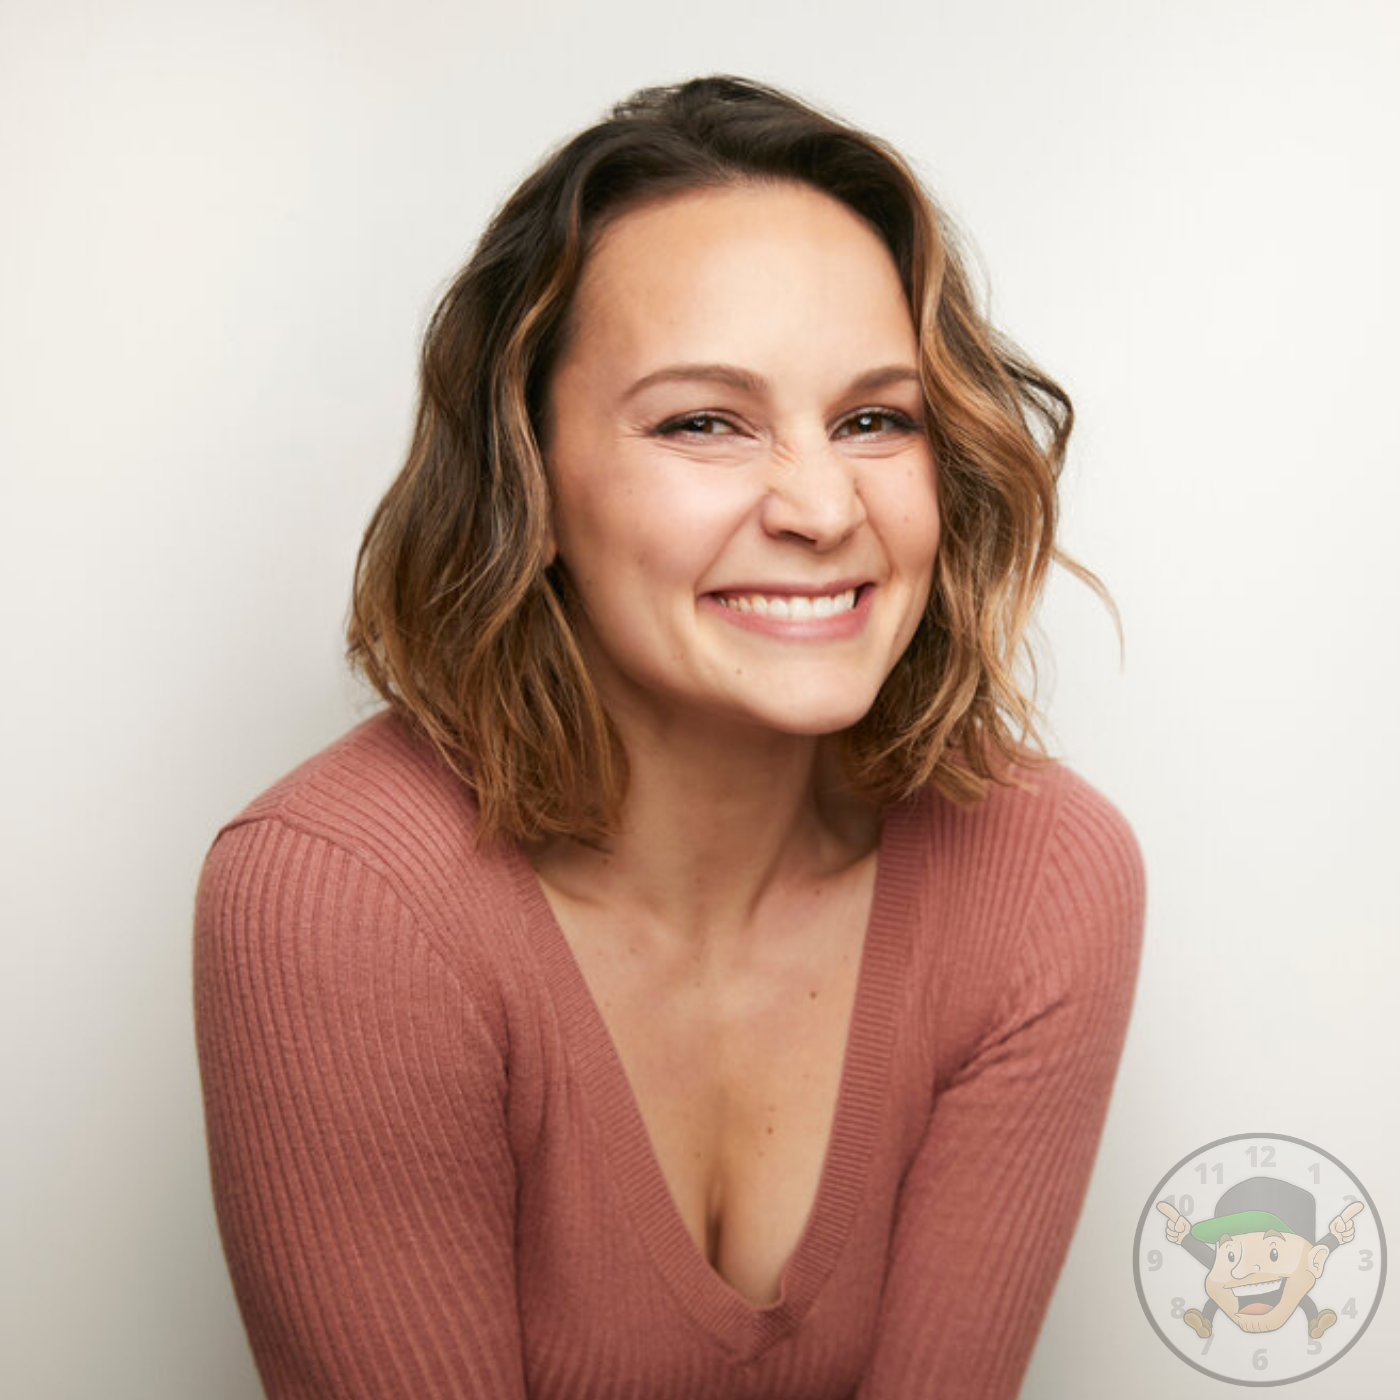 Interview w/ Jessica Lorion [Actress & Host of Mamas in Training Podcast]